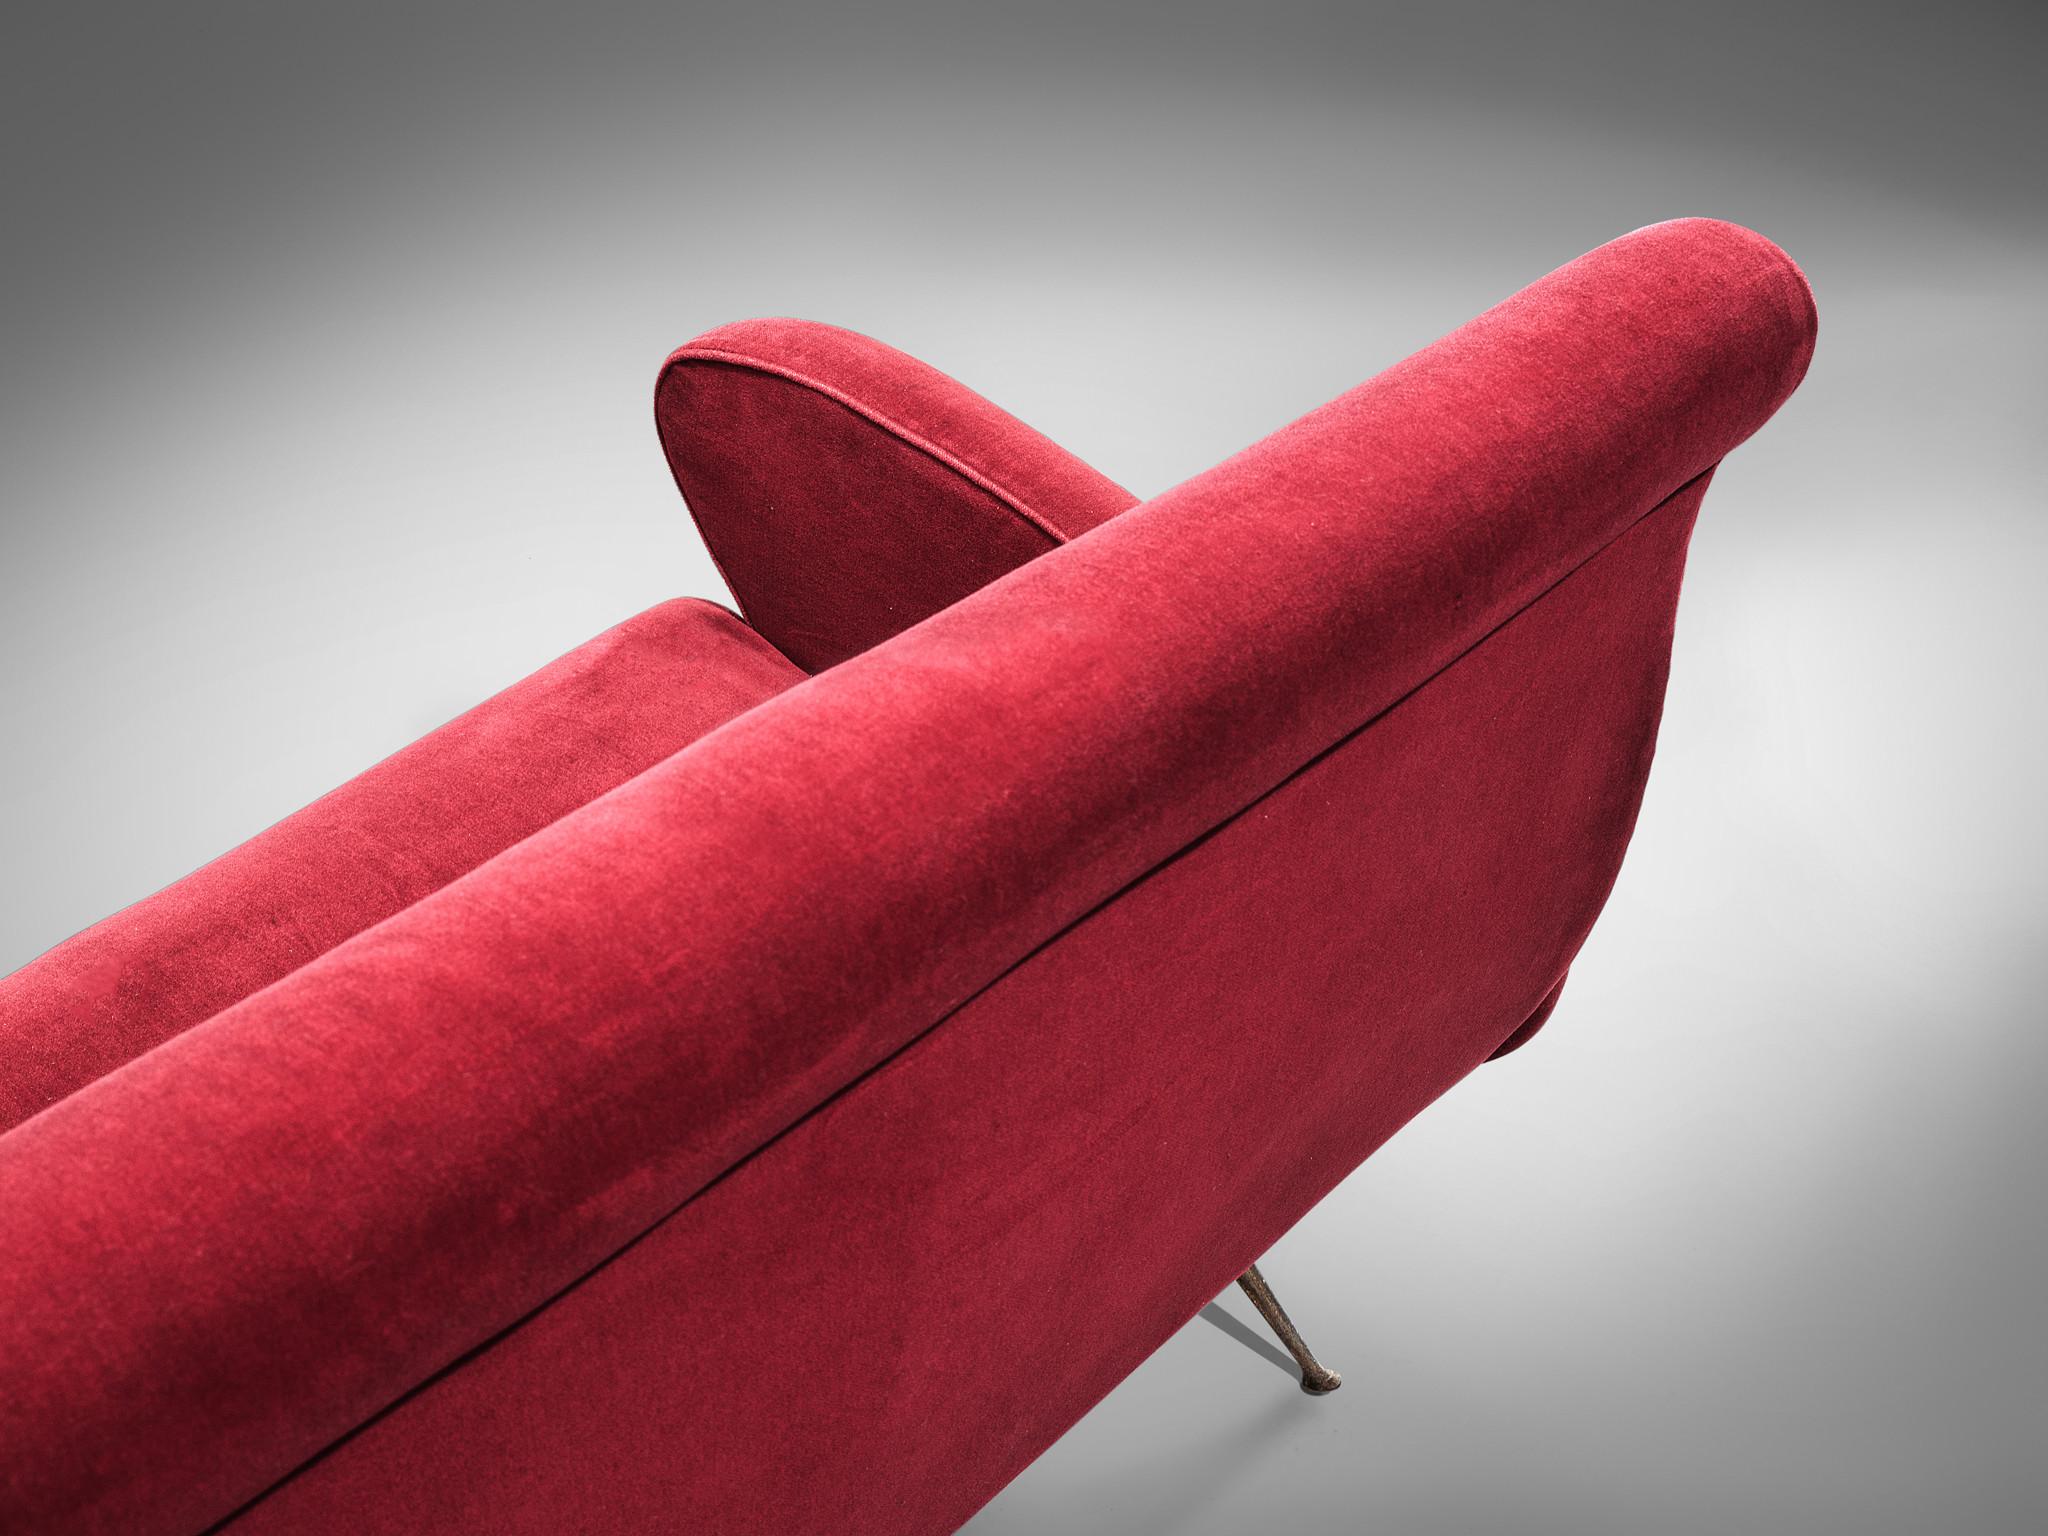 Sofa, red velvet, brass, Italy, 1950s.

This sofa is an iconic example of Italian design from the fifties. Organic and sculptural the two-seat sofa is anything but minimalistic. Equipped with the original stiletto brass feet with a sleek profile